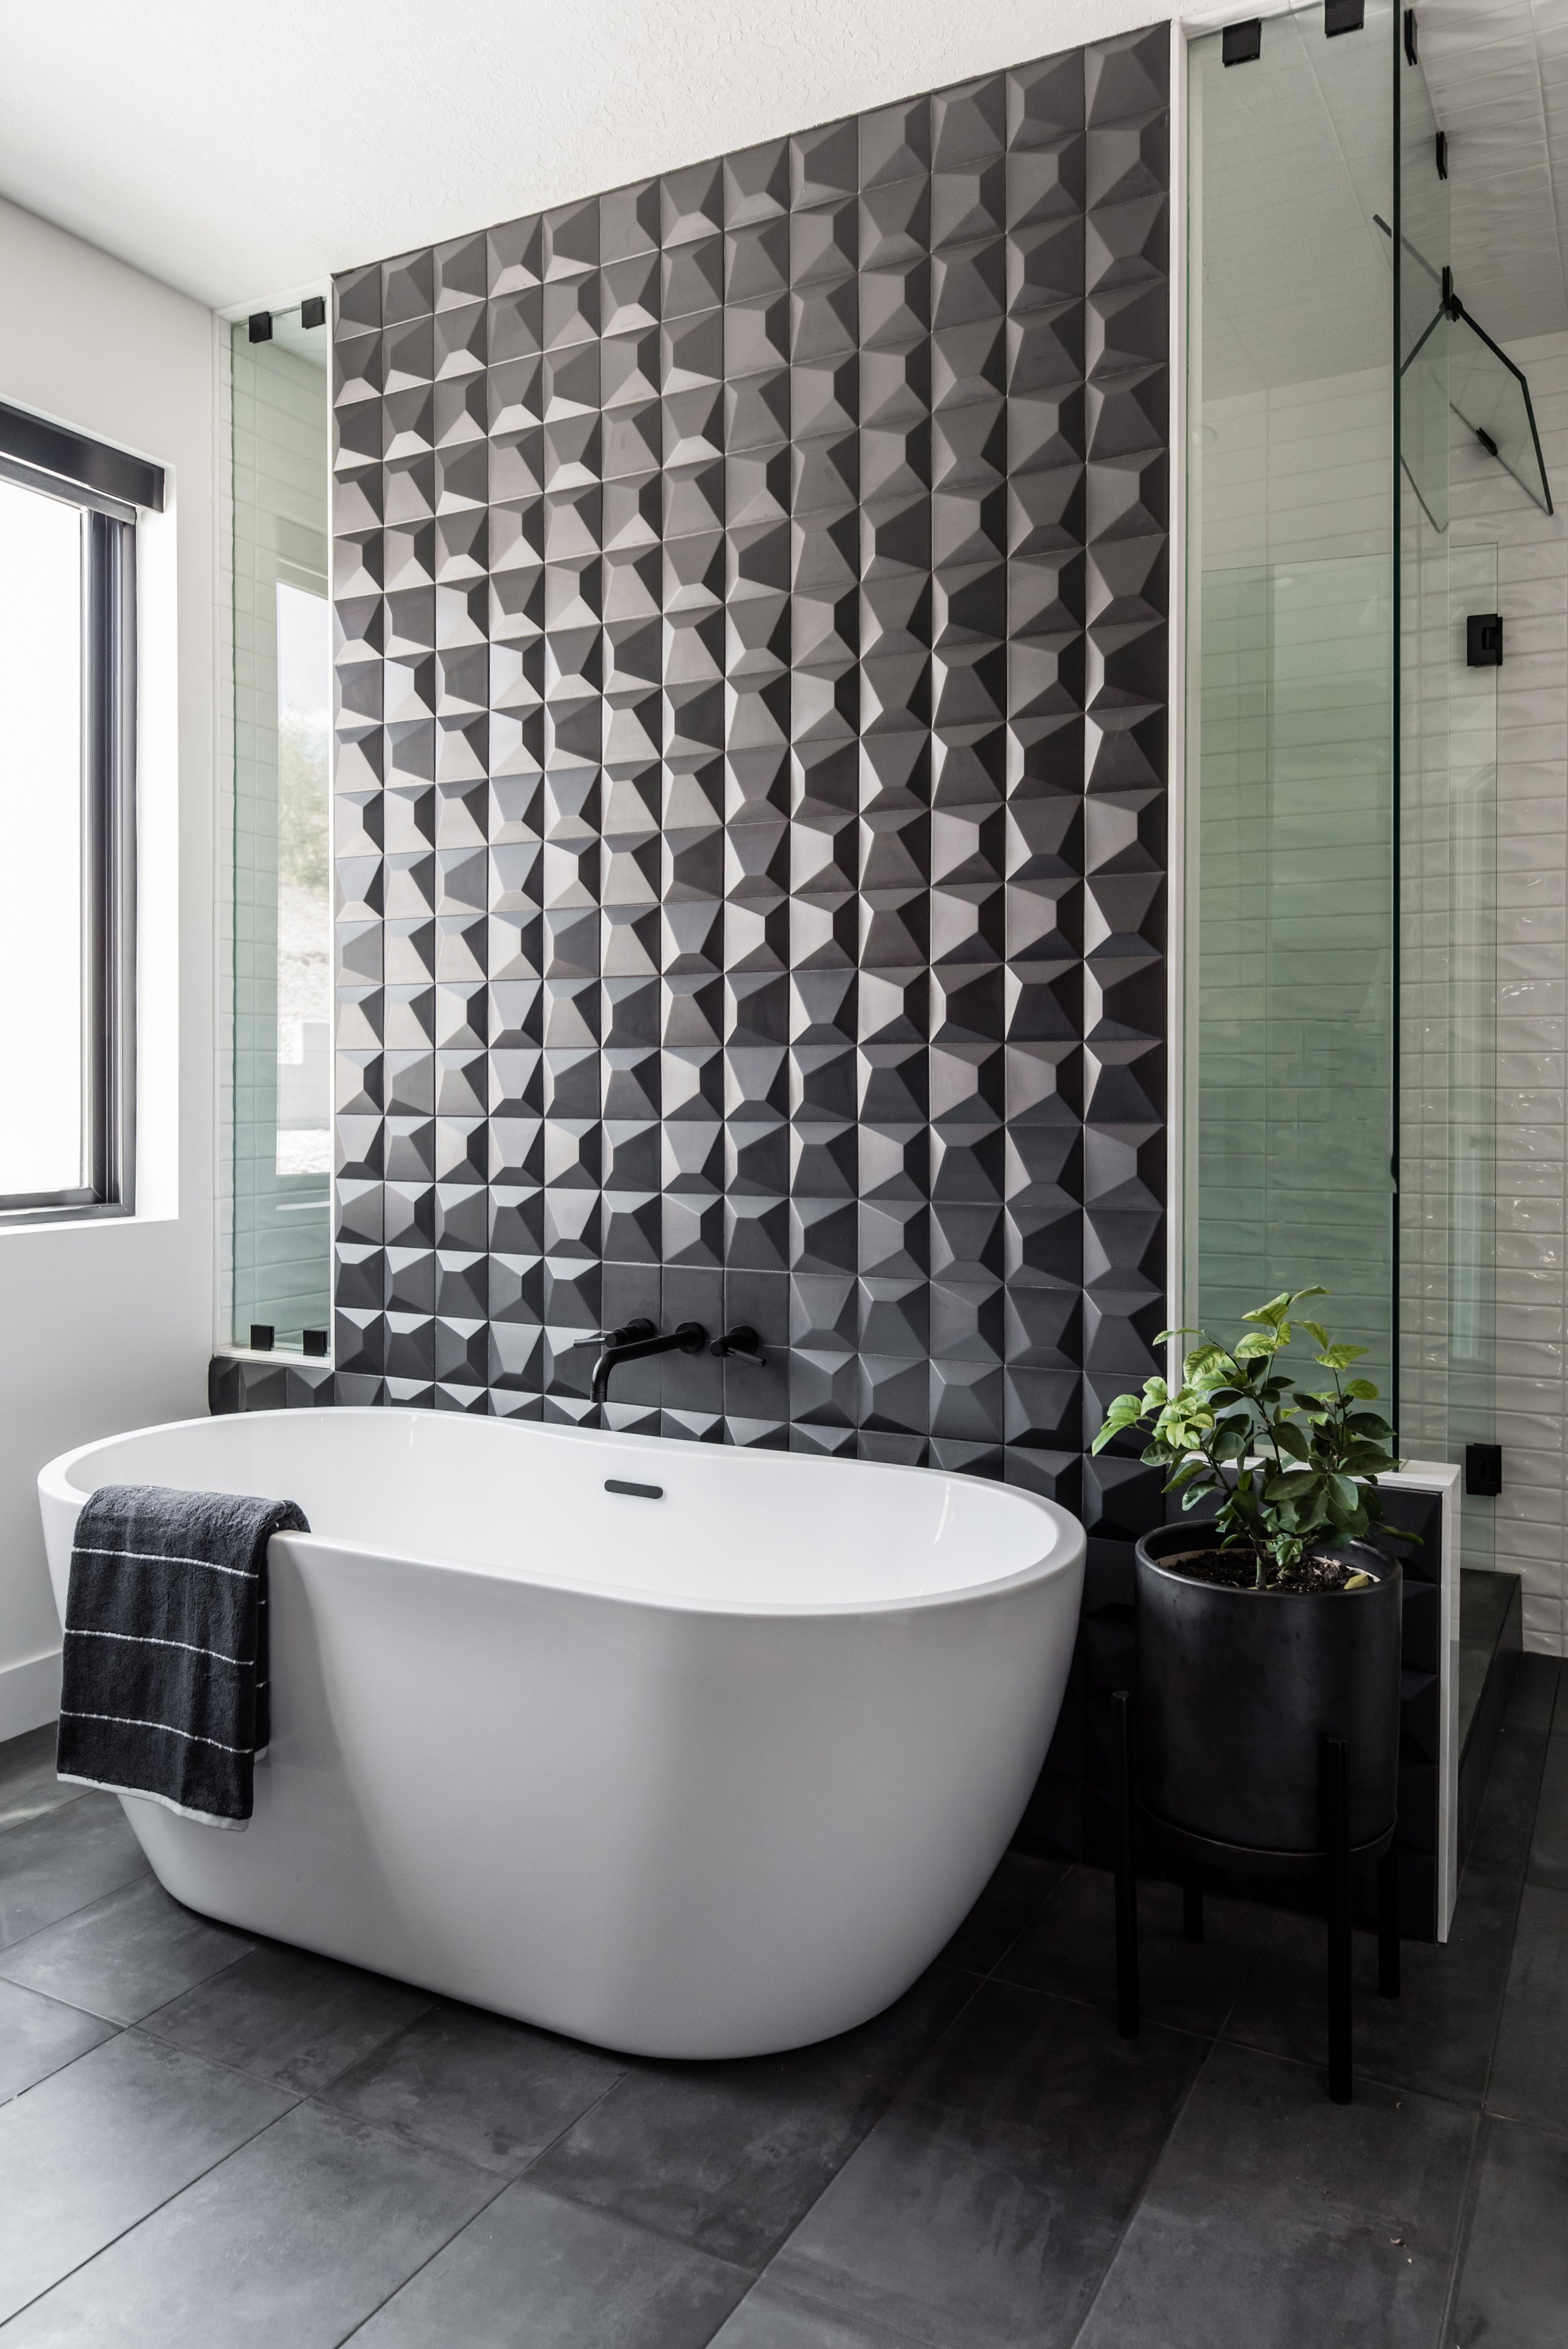  The black tiled wall behind this free-standing bathtub draws your eye to the contrast of color, making both stand out even more. Black tile bathroom freestanding bathtub Millville Utah #blacktile #blackandwhitebathroom #lizpowell 